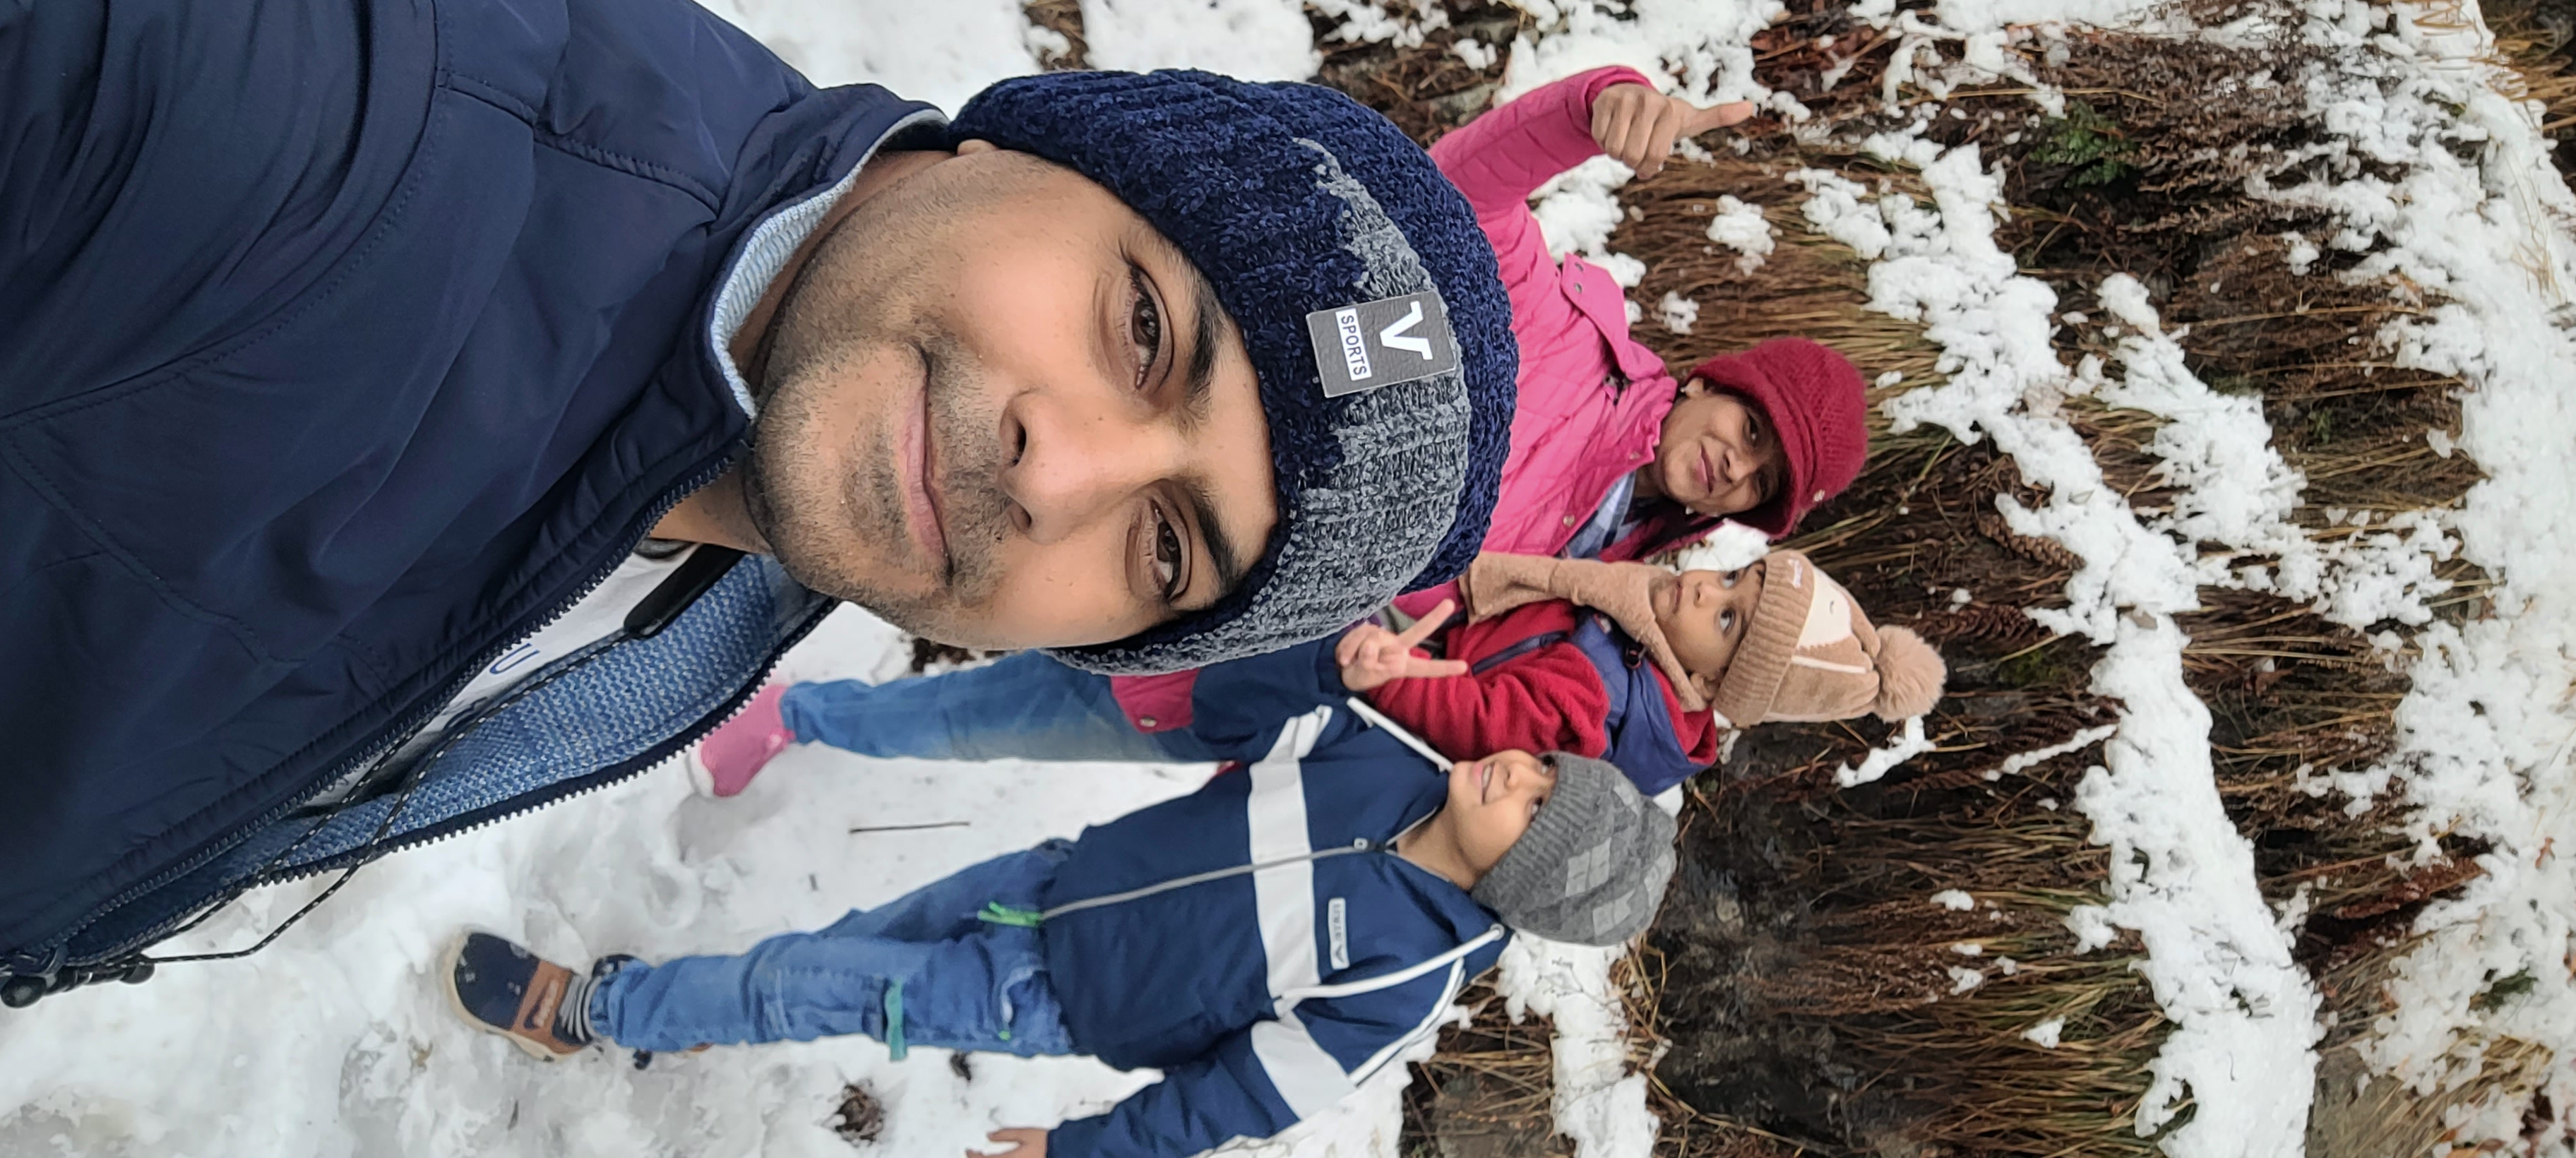 Spending time with family at Kanatal